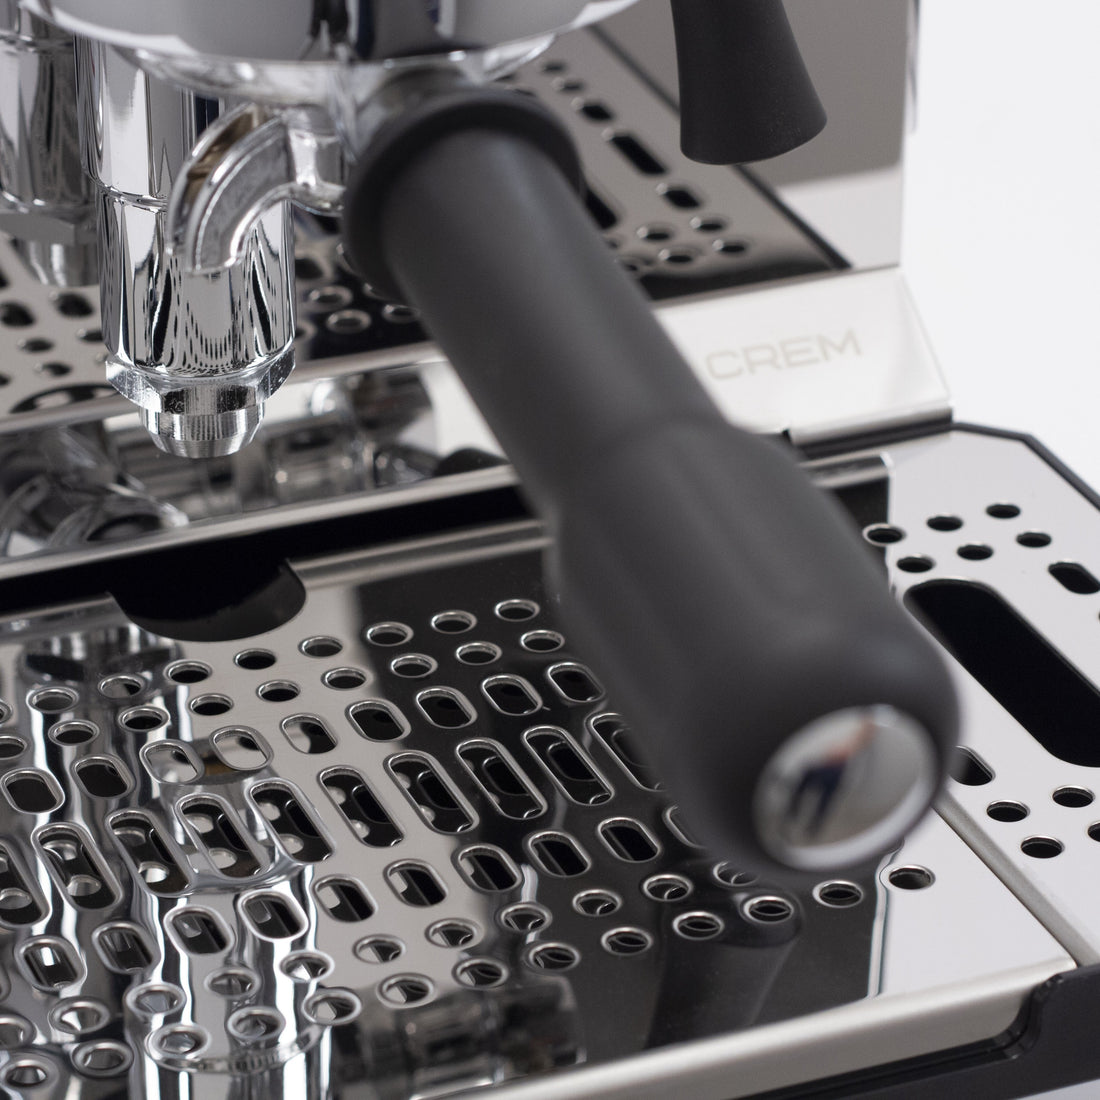 The CREM ONE DUO-V has a massive drip tray for a large work surface.